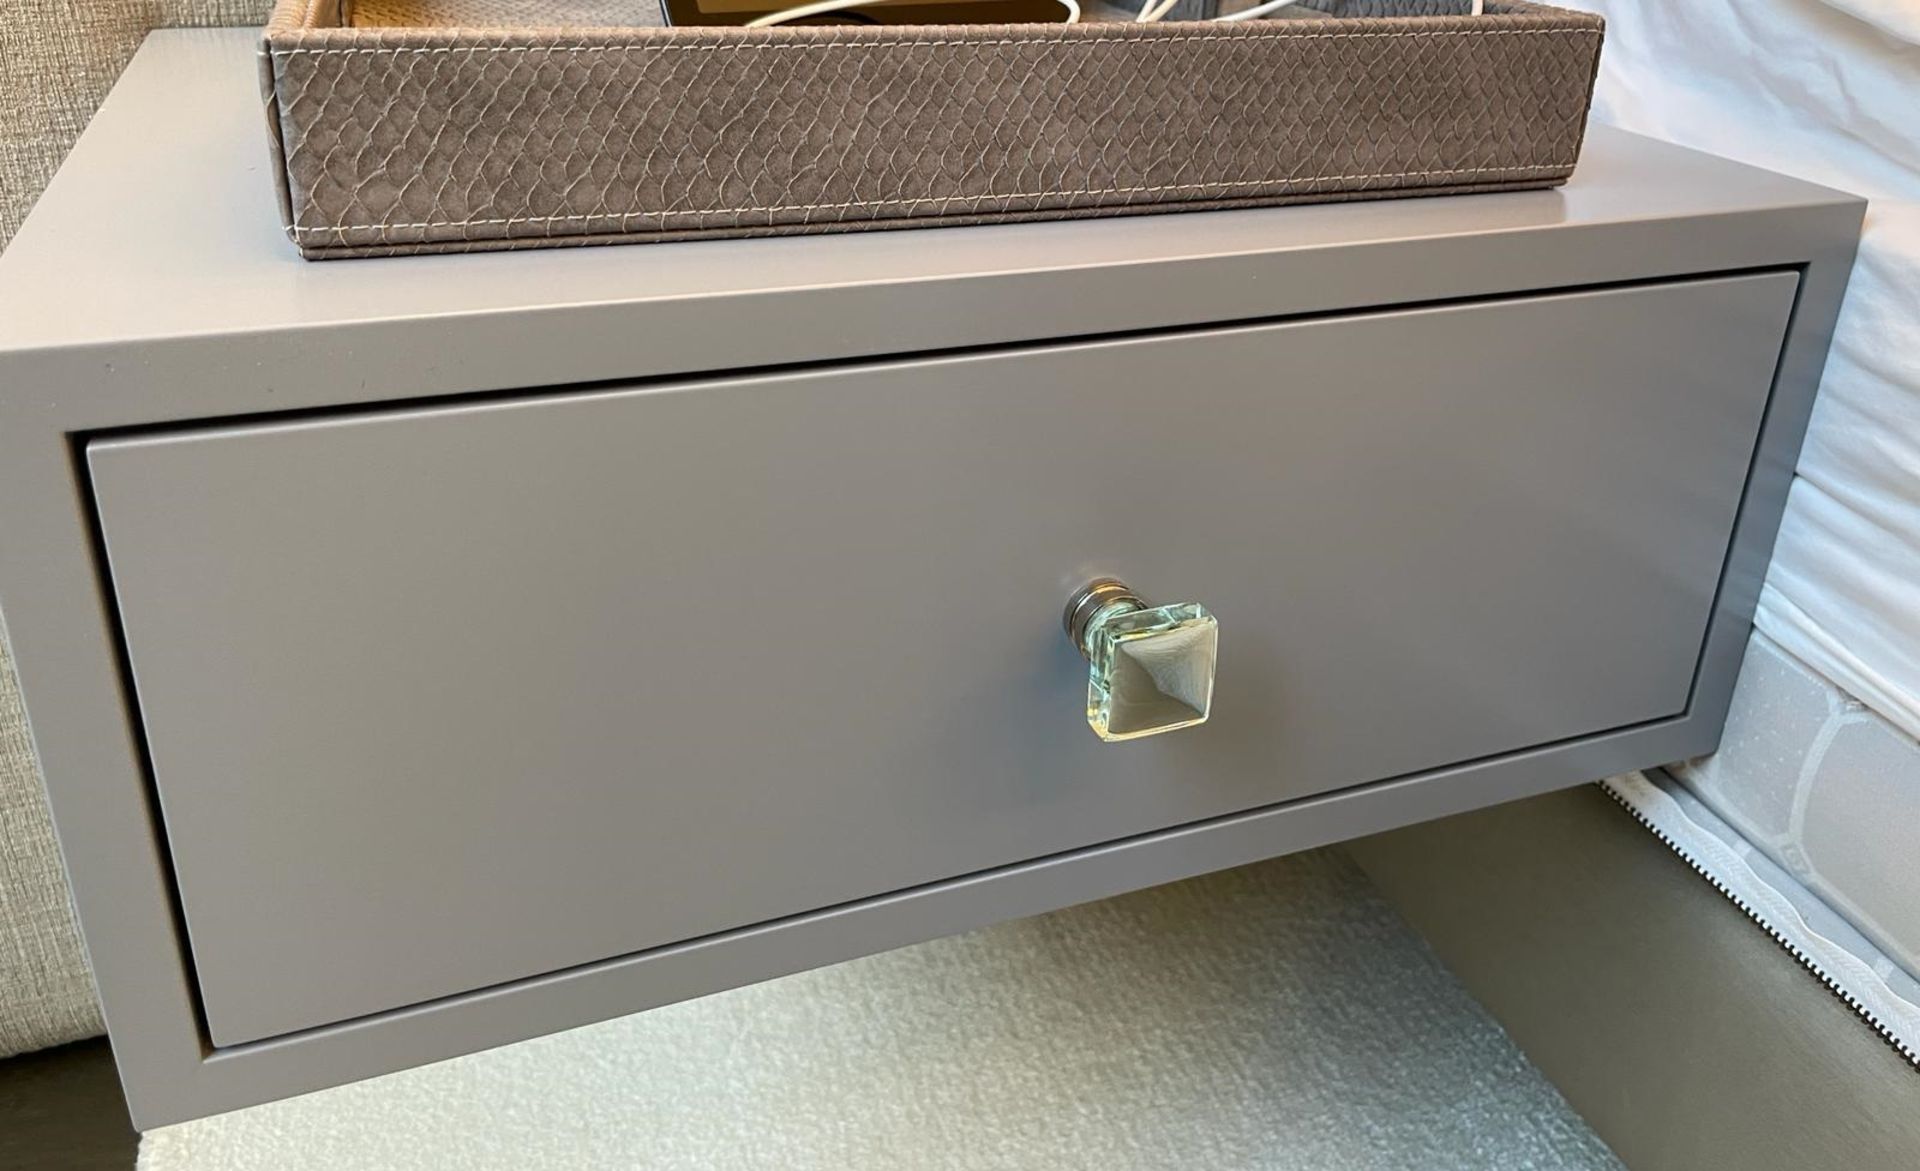 Pair of Stylish Wall Hung Bedside Drawers with a Grey Lacquer Finish and Glass Handles - Image 11 of 14